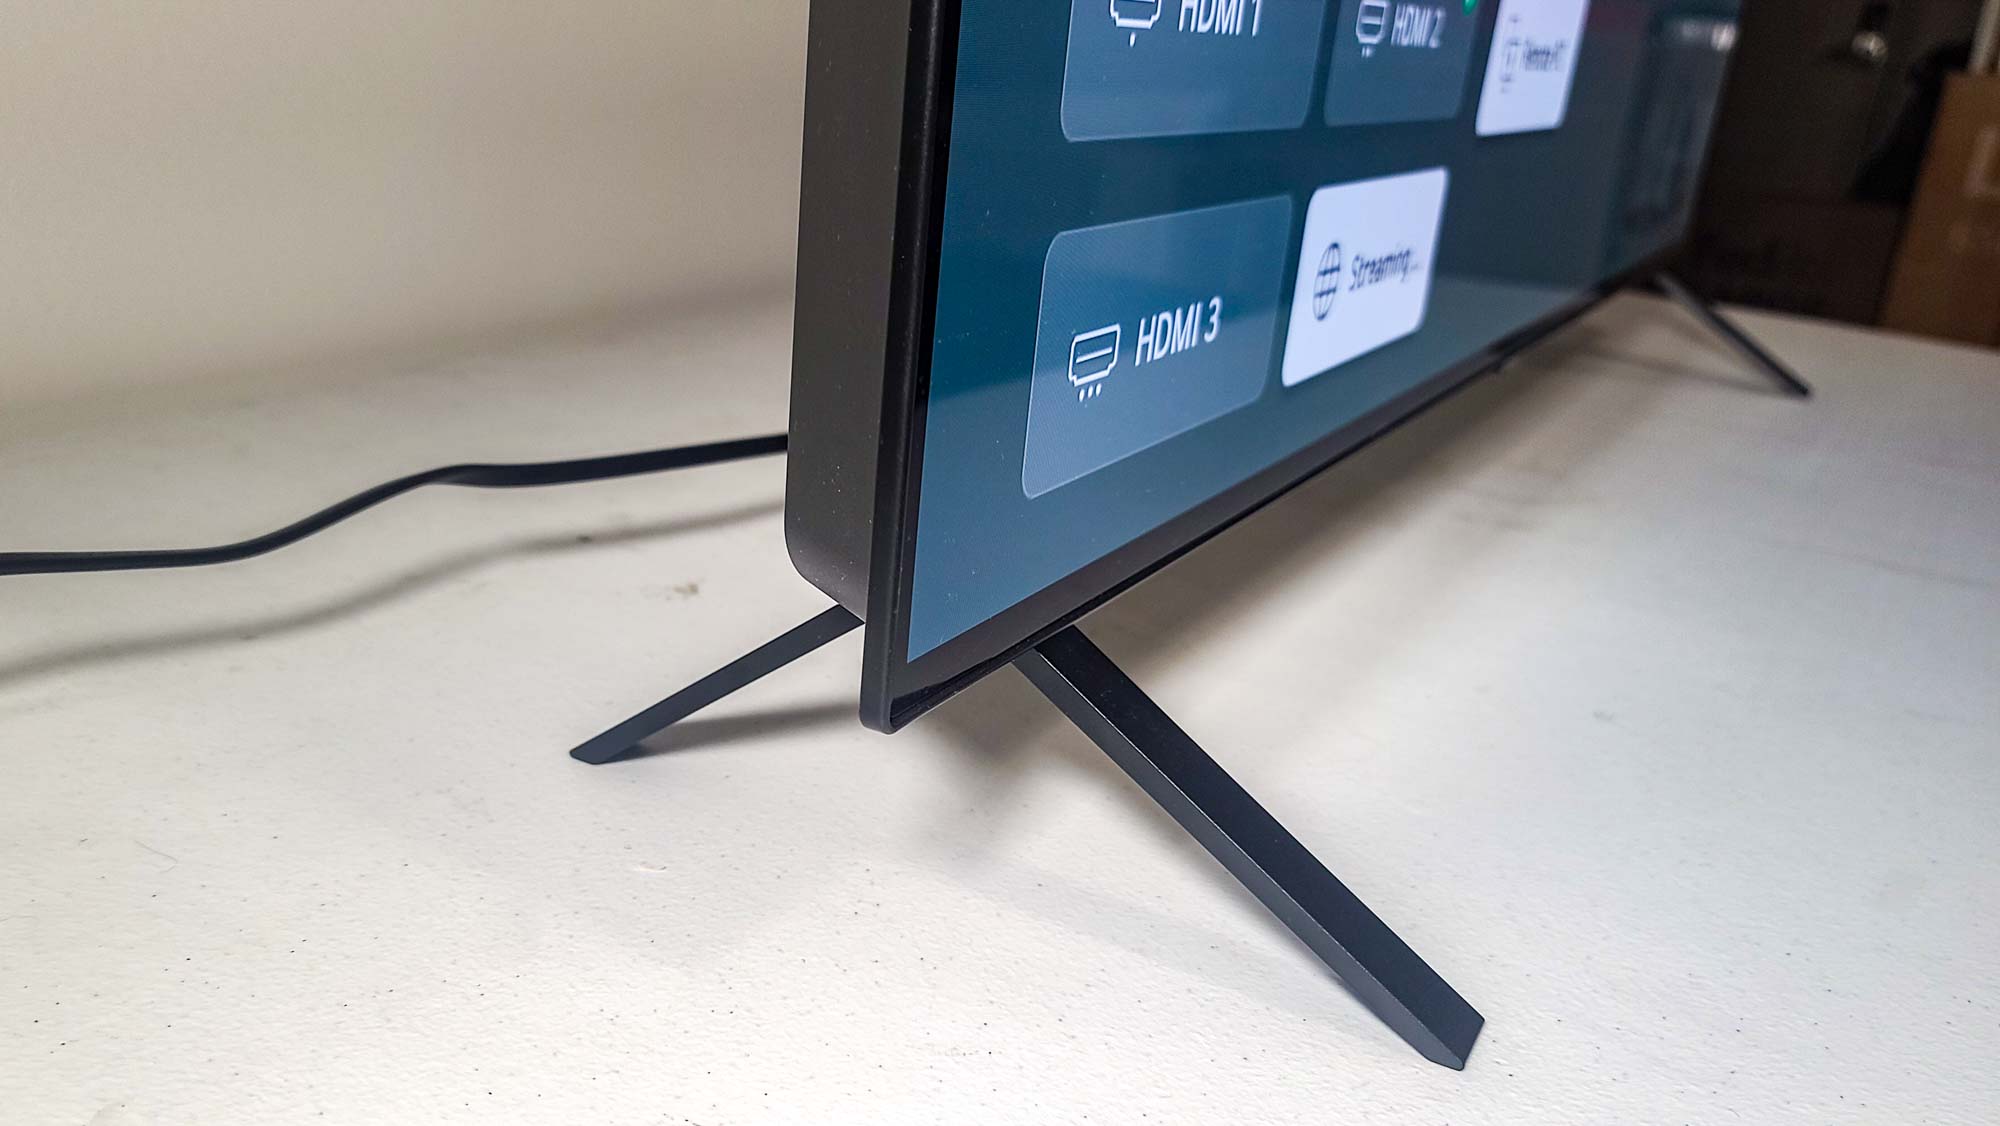 LG A2 OLED TV review